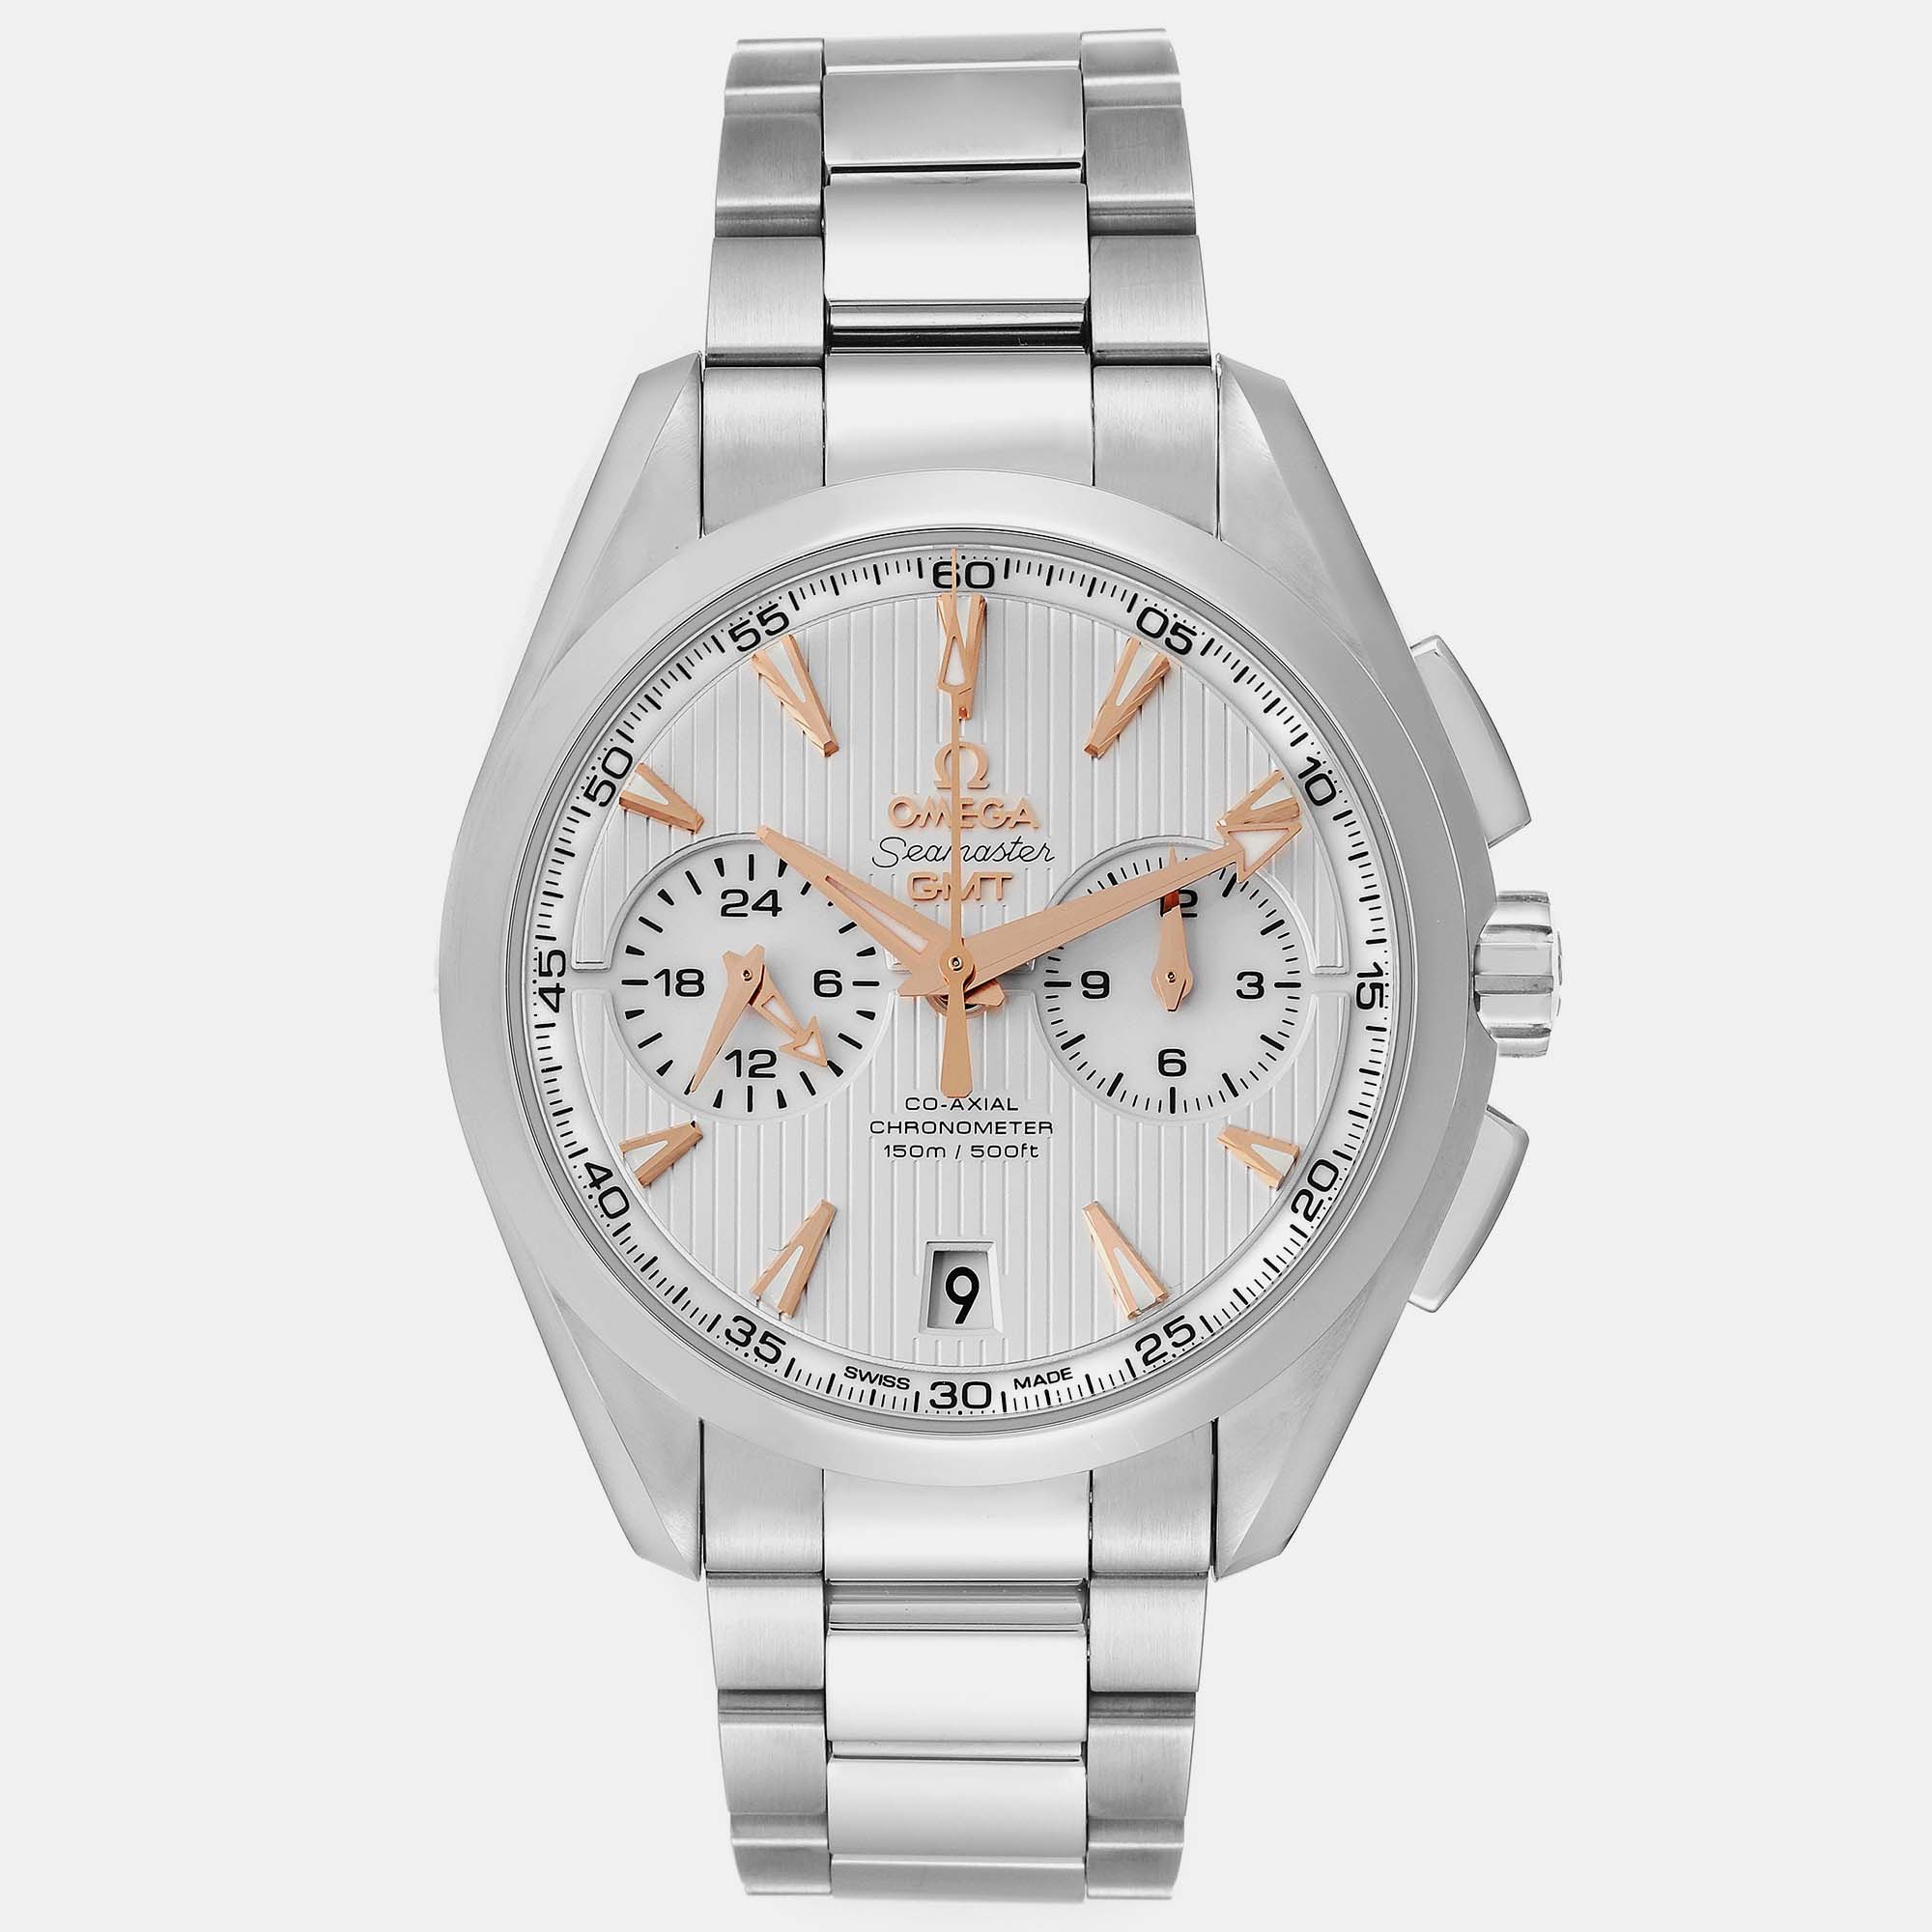 A meticulously crafted watch holds the promise of enduring appeal all day comfort and investment value. Carefully assembled and finished to stand out on your wrist this Omega timepiece is a purchase you will cherish.